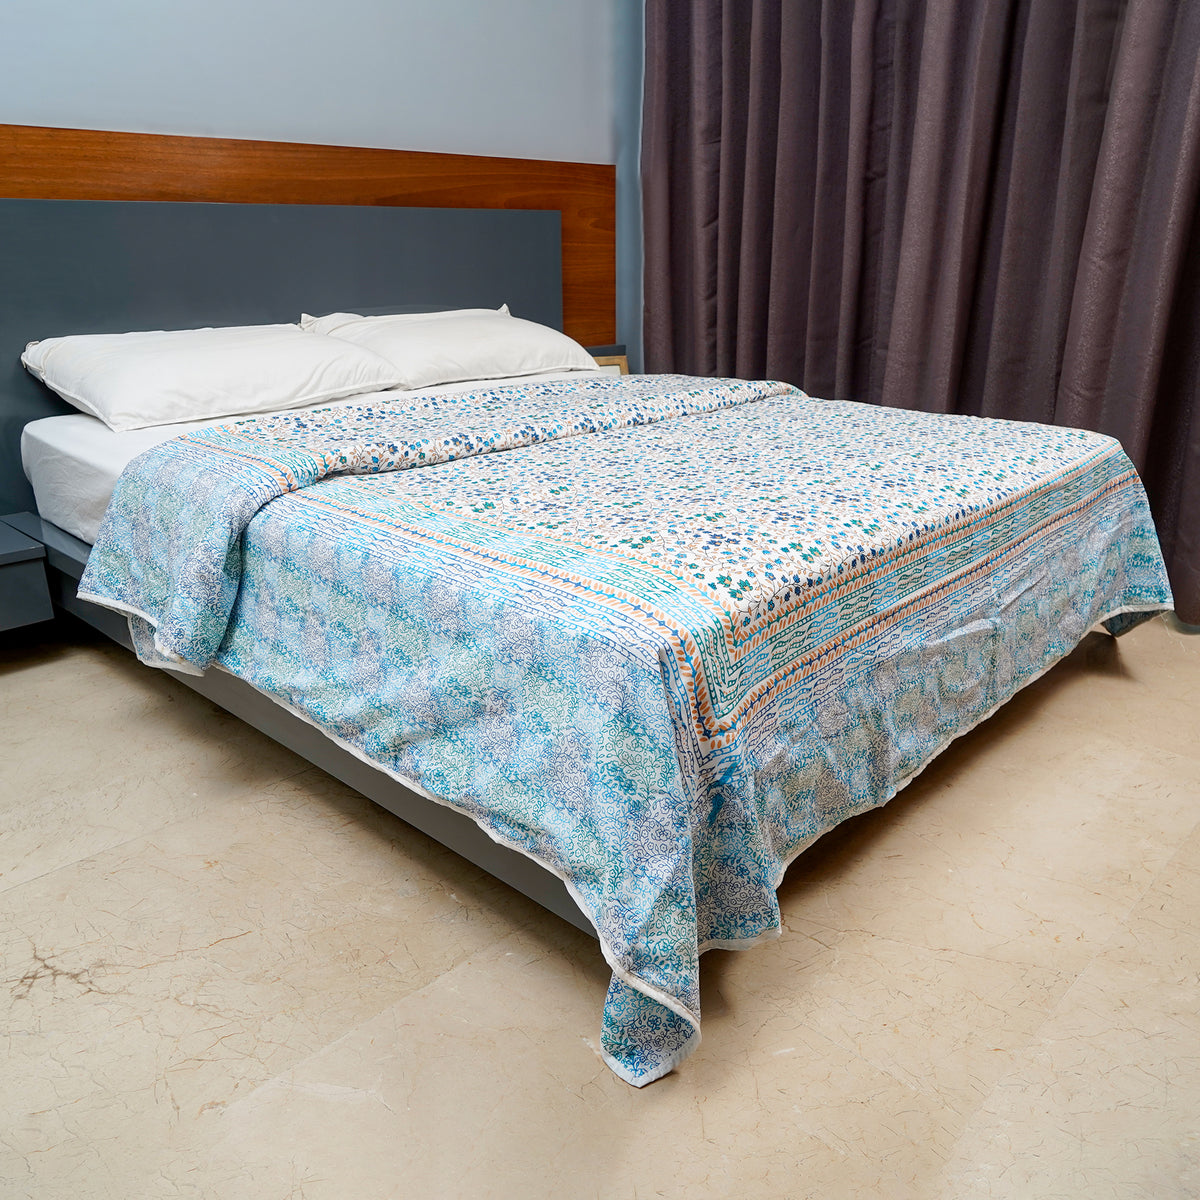 Inizio Cotton Non-Reversible Double Bed Dohar  AC Blanket Hand Block Printed with Floral Design Soft & Comfortable Quilt